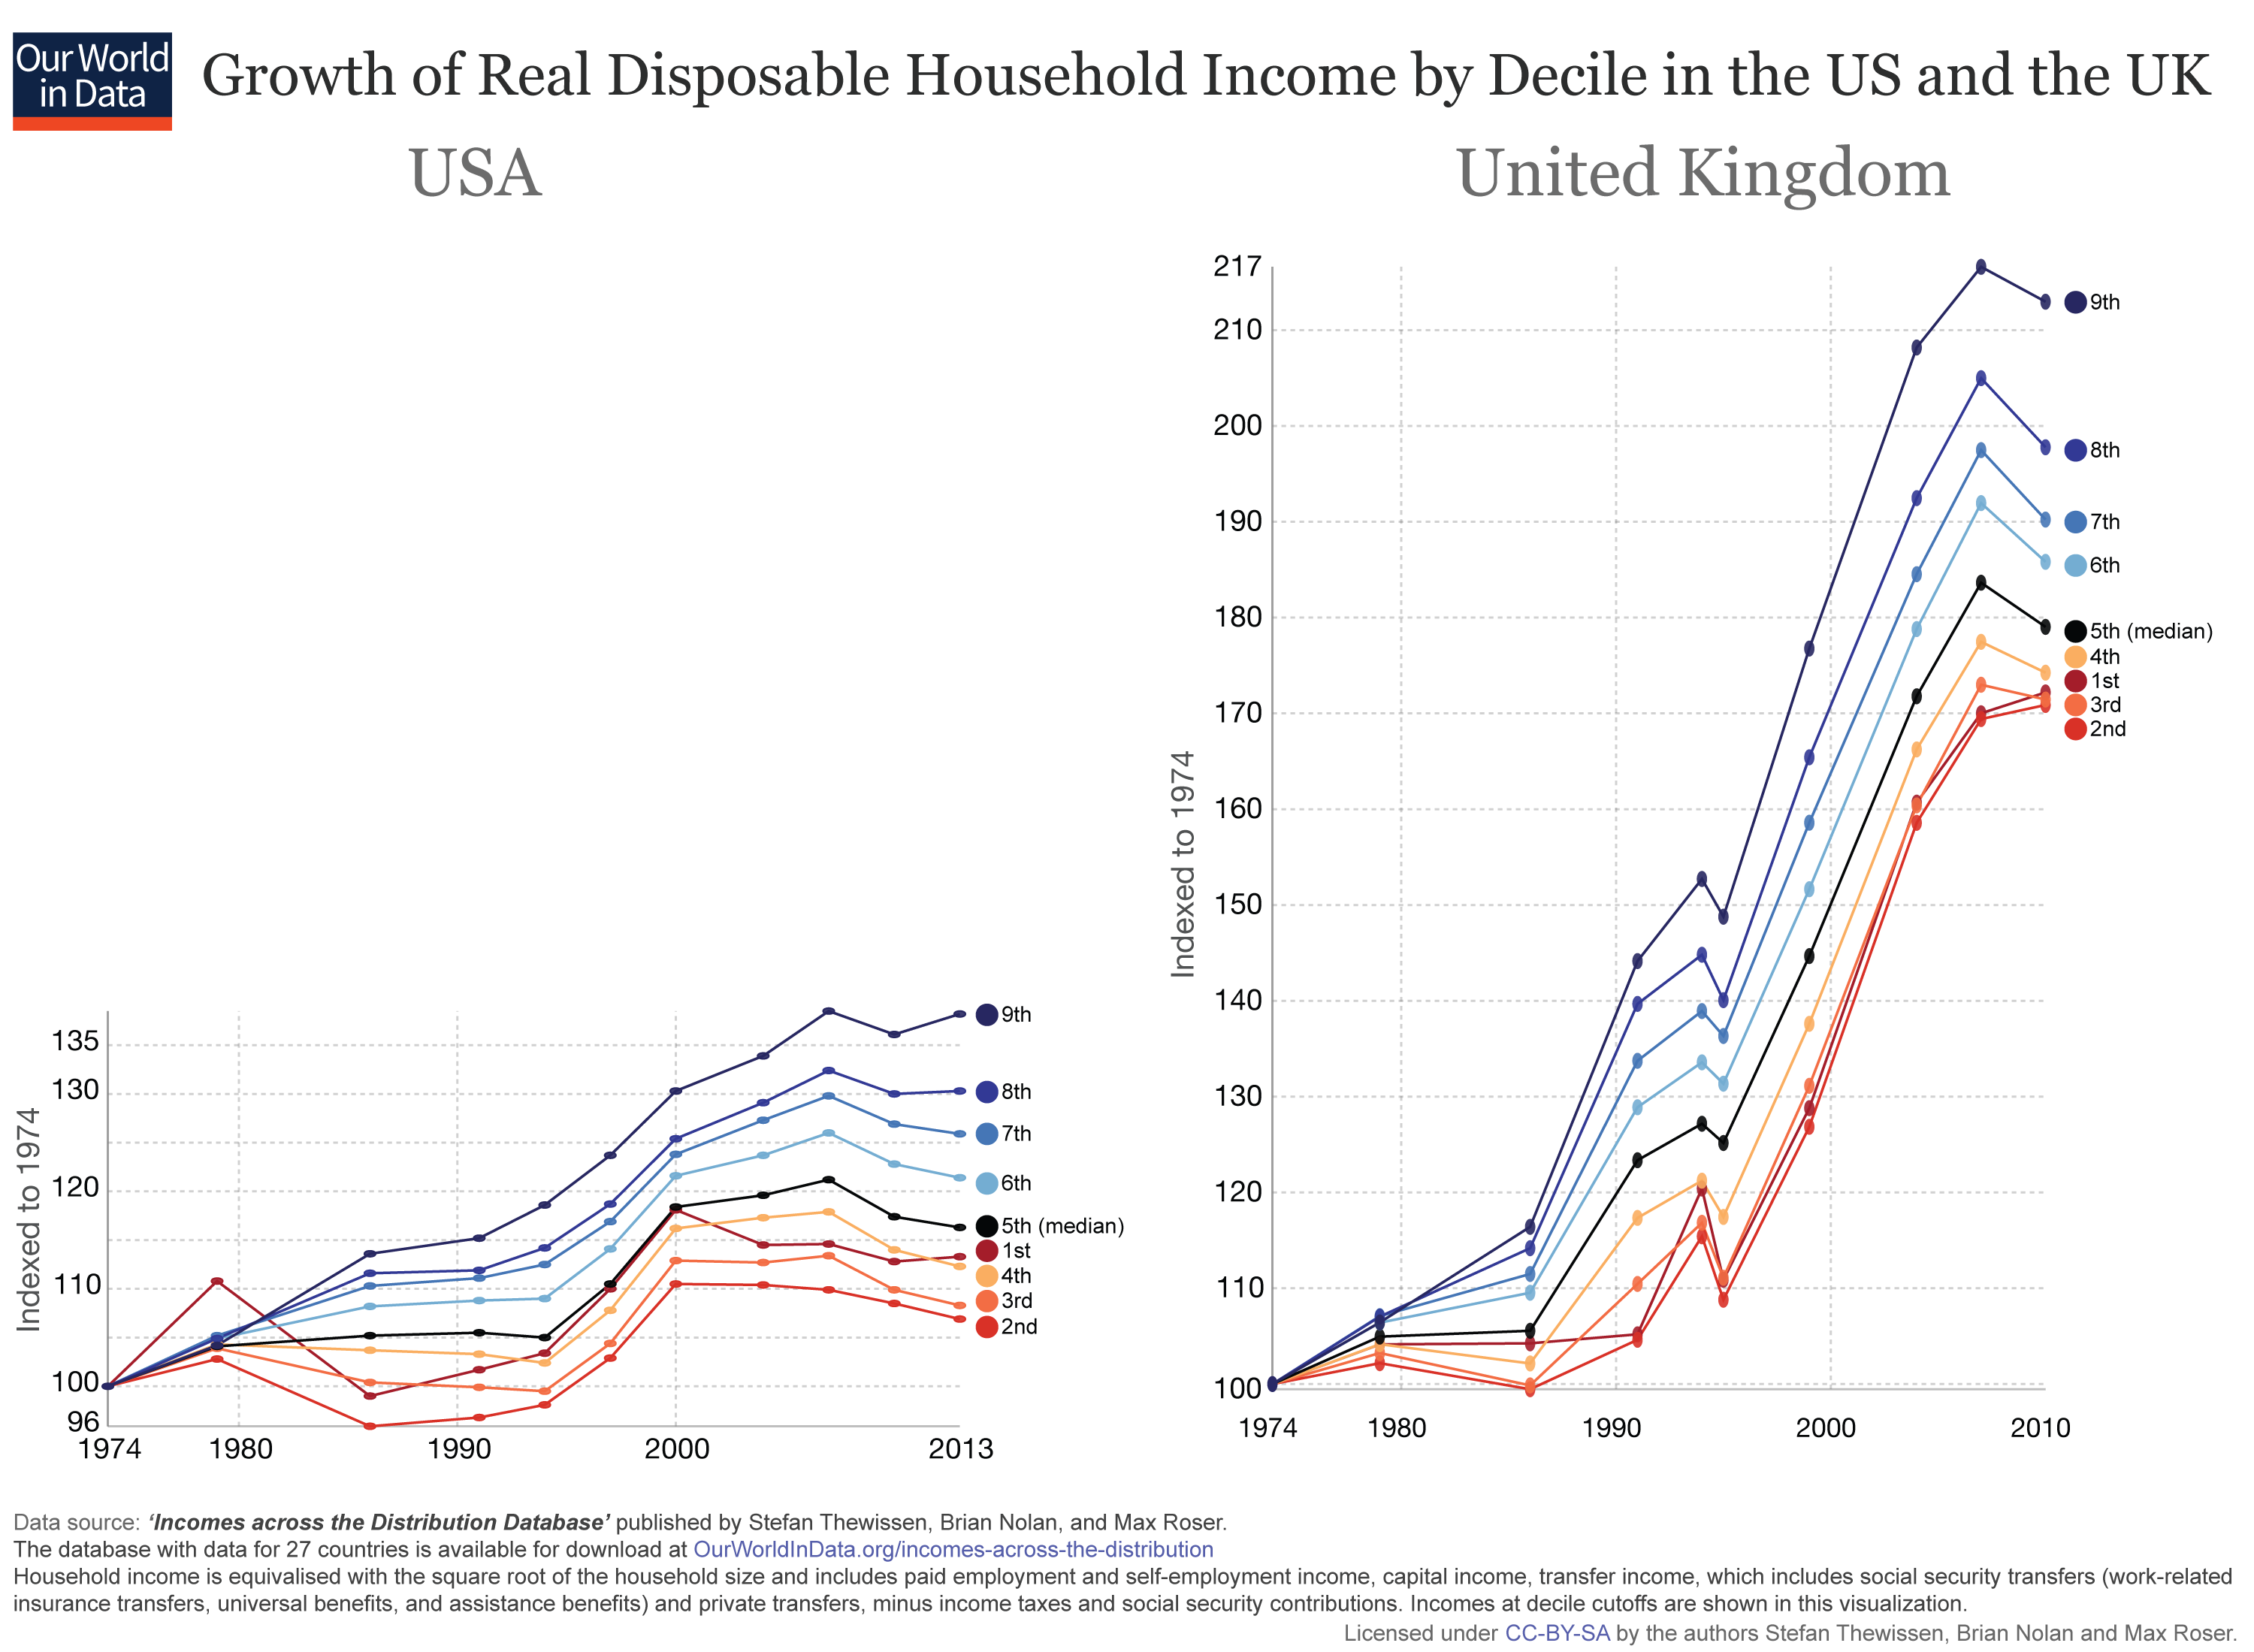 Two stories: household income in the US and the UK